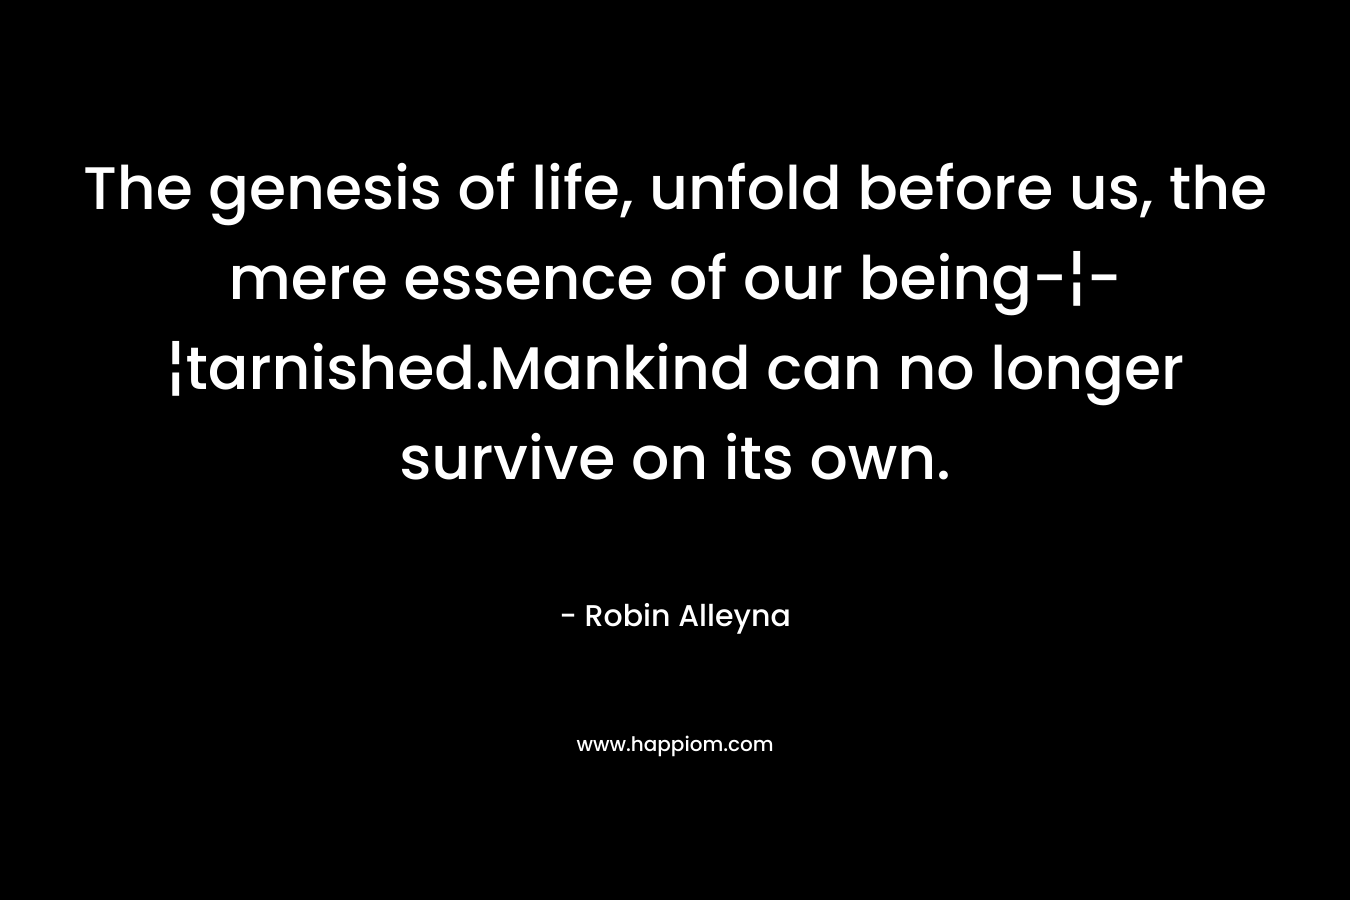 The genesis of life, unfold before us, the mere essence of our being-¦-¦tarnished.Mankind can no longer survive on its own.